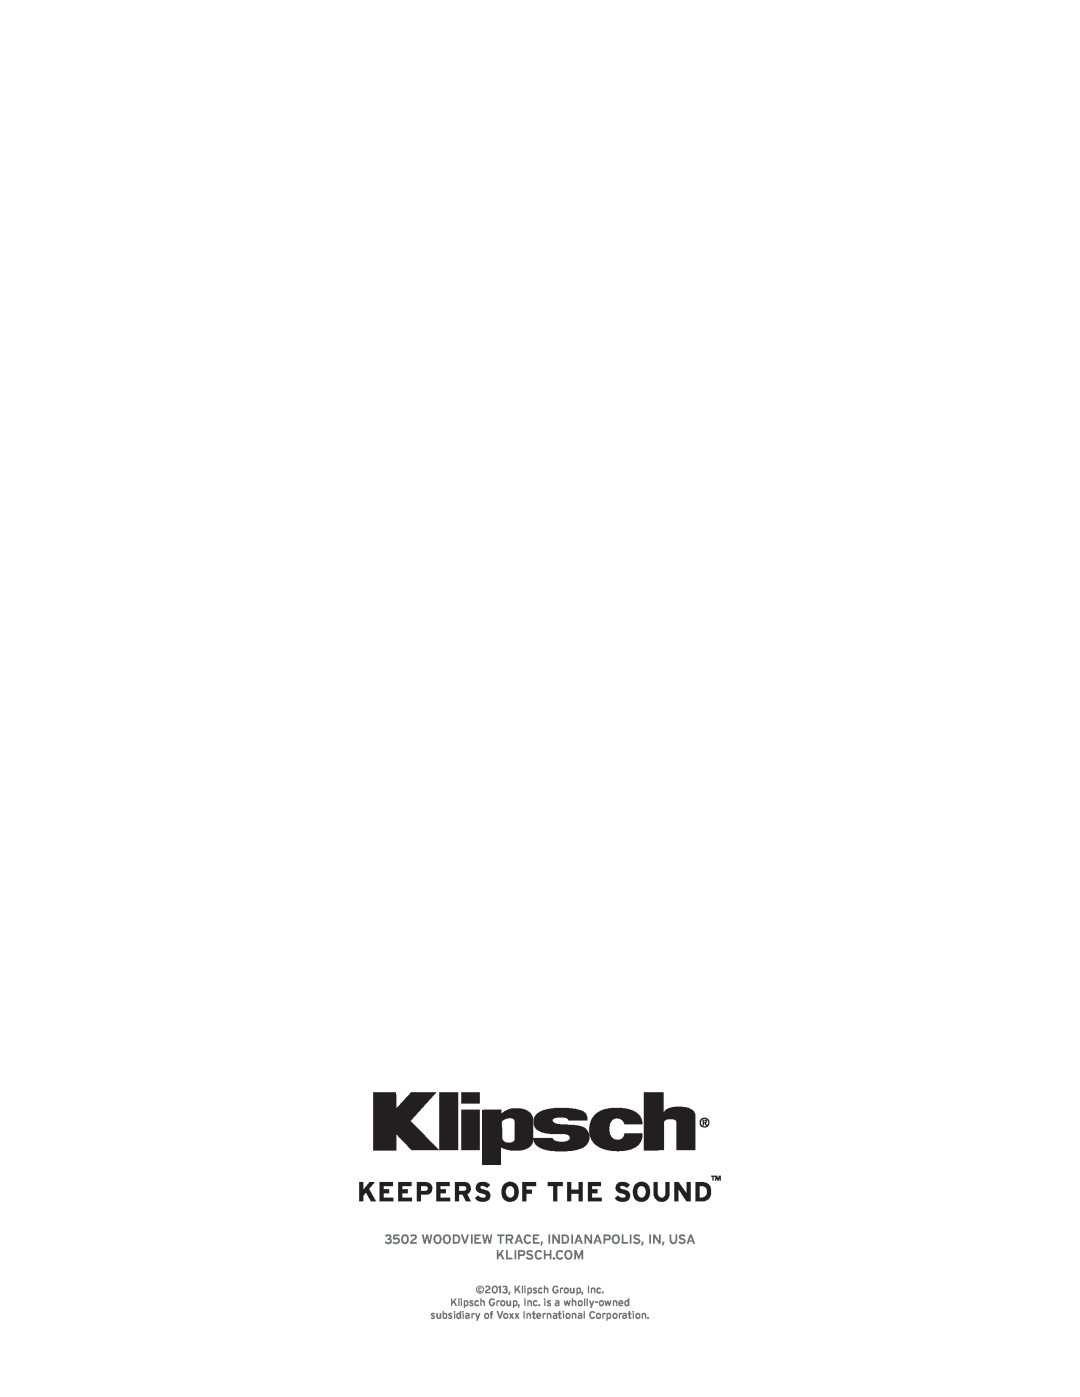 Klipsch KPT-801 Woodview Trace, Indianapolis, IN, USA, 2013, Klipsch Group, Inc, Klipsch Group, Inc. is a wholly-owned 